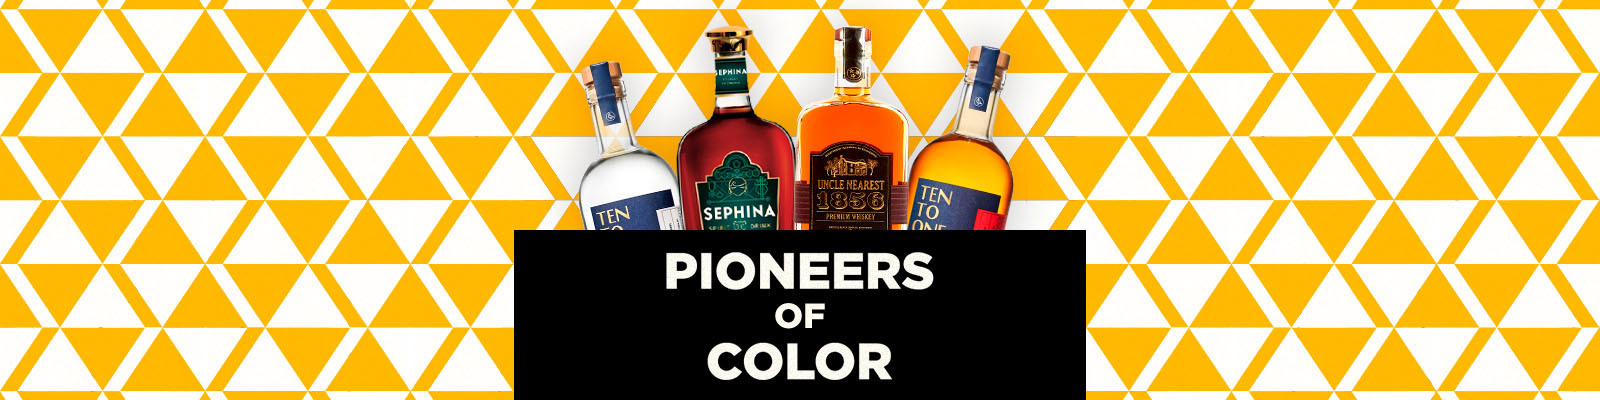 Pioneers of Color 